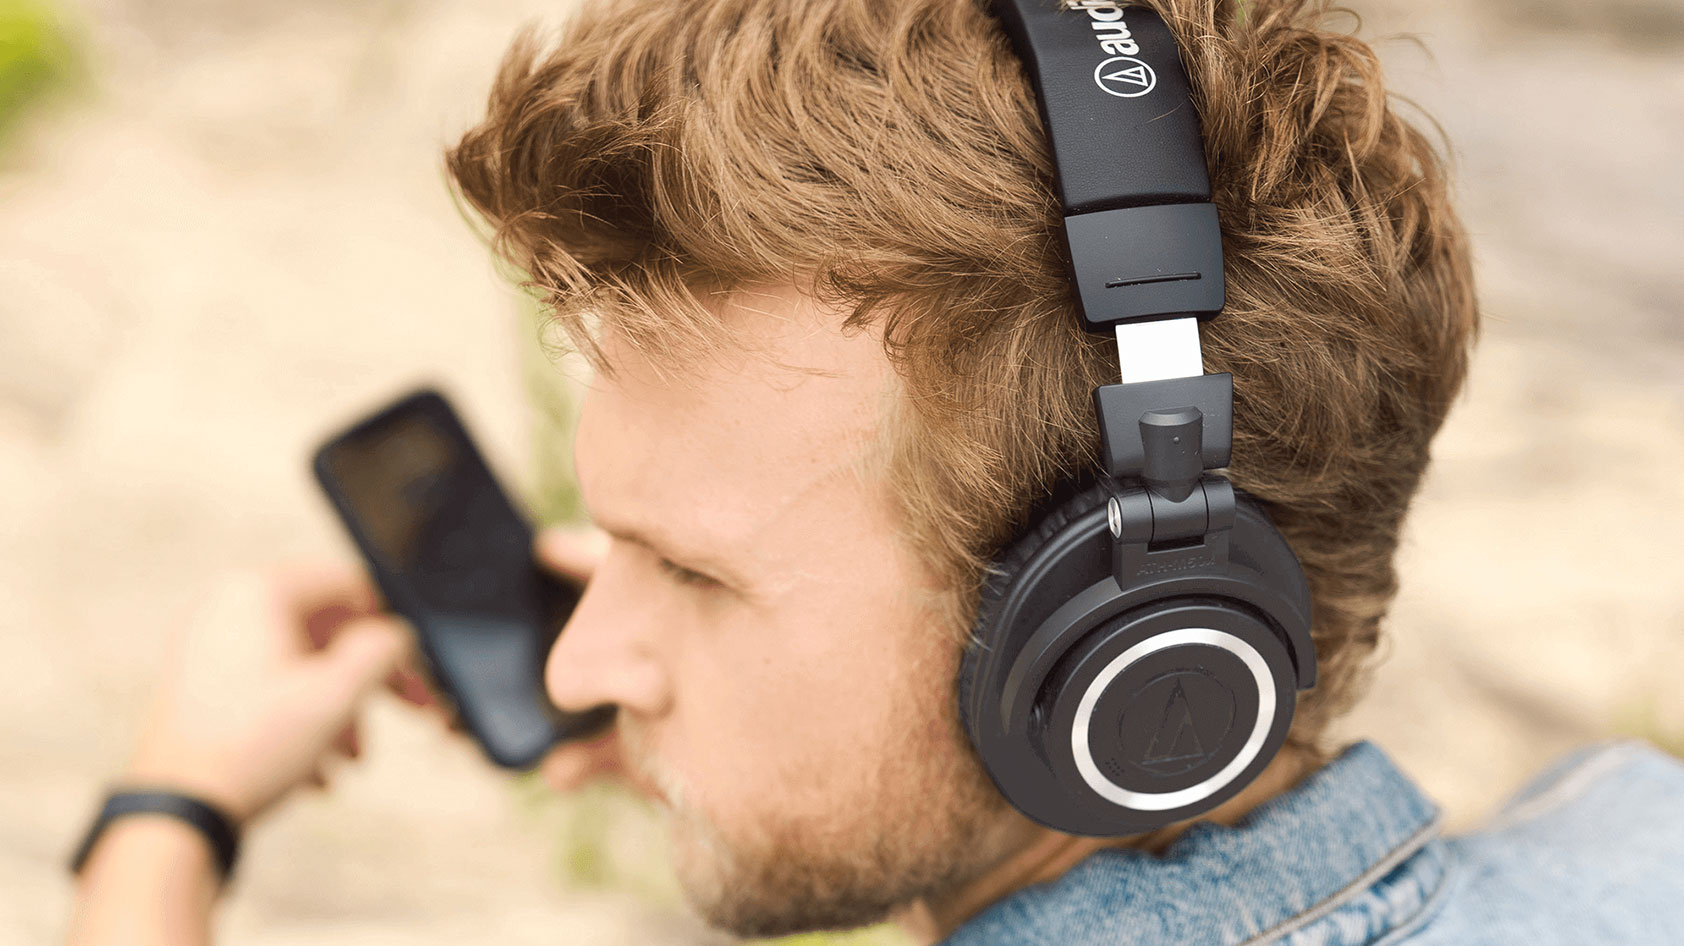 A man wears the audio technica ath m50xbt2 pm a beach while holding a smartphone.